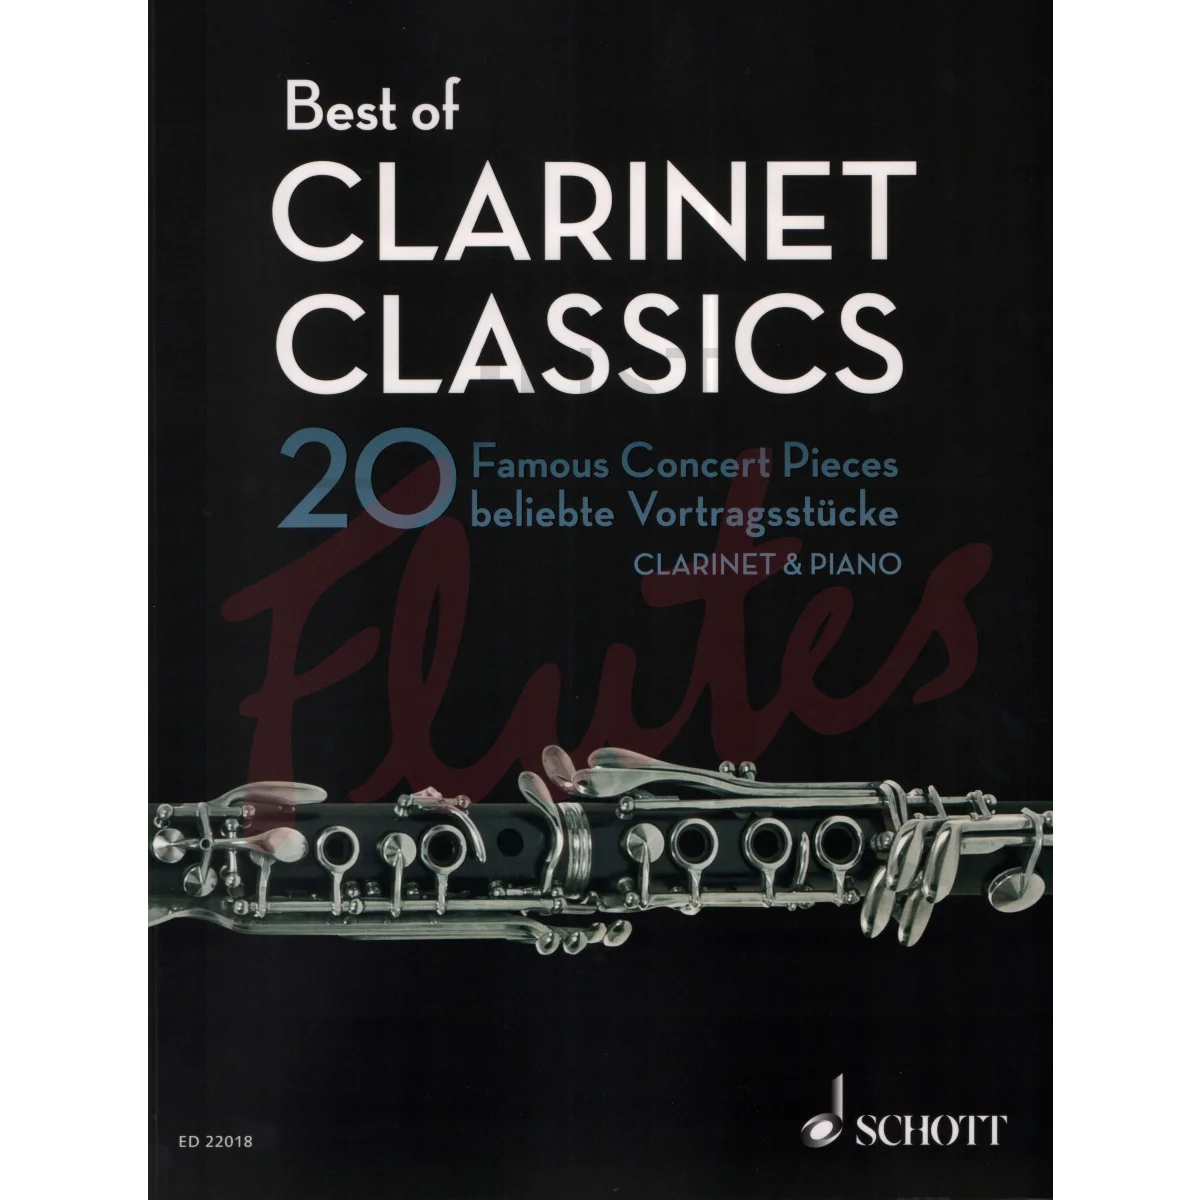 Best of Clarinet Classics for Clarinet and Piano